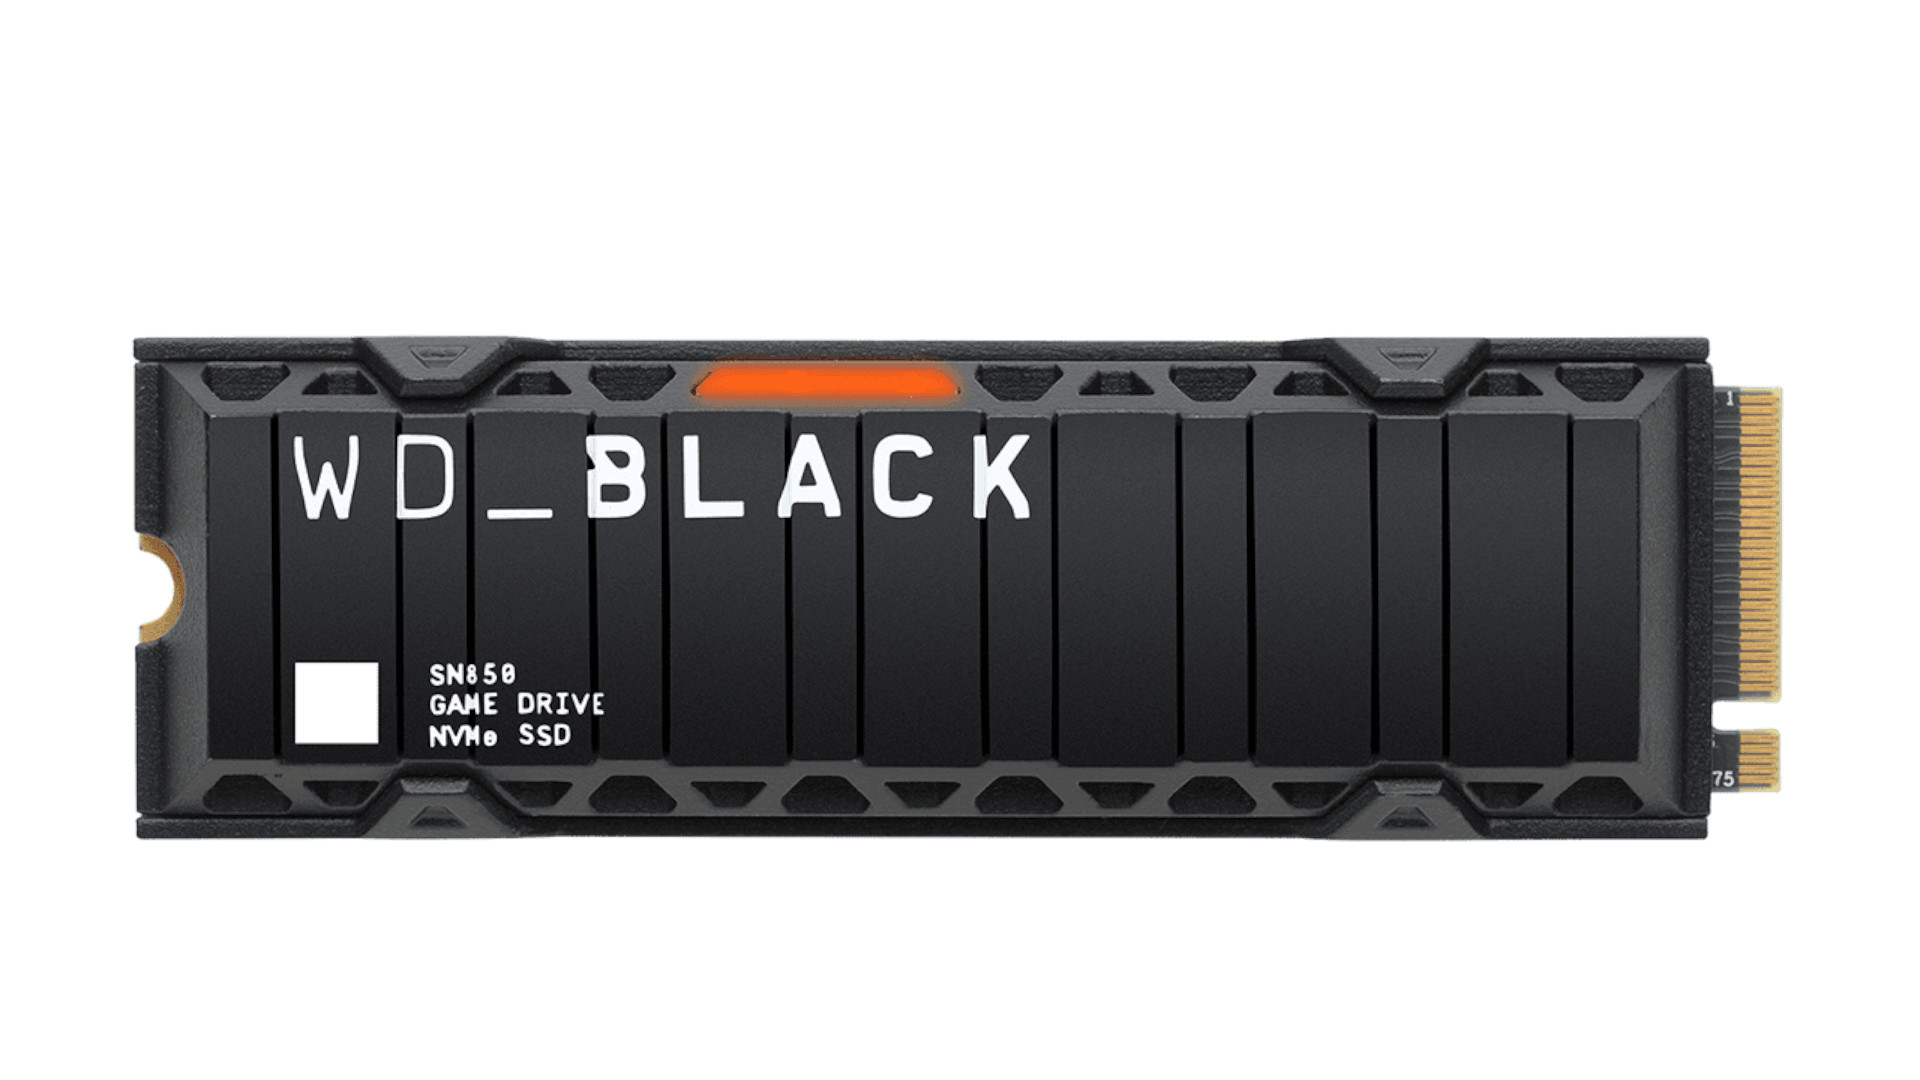 The best SSD for gaming is the WD Black SN850